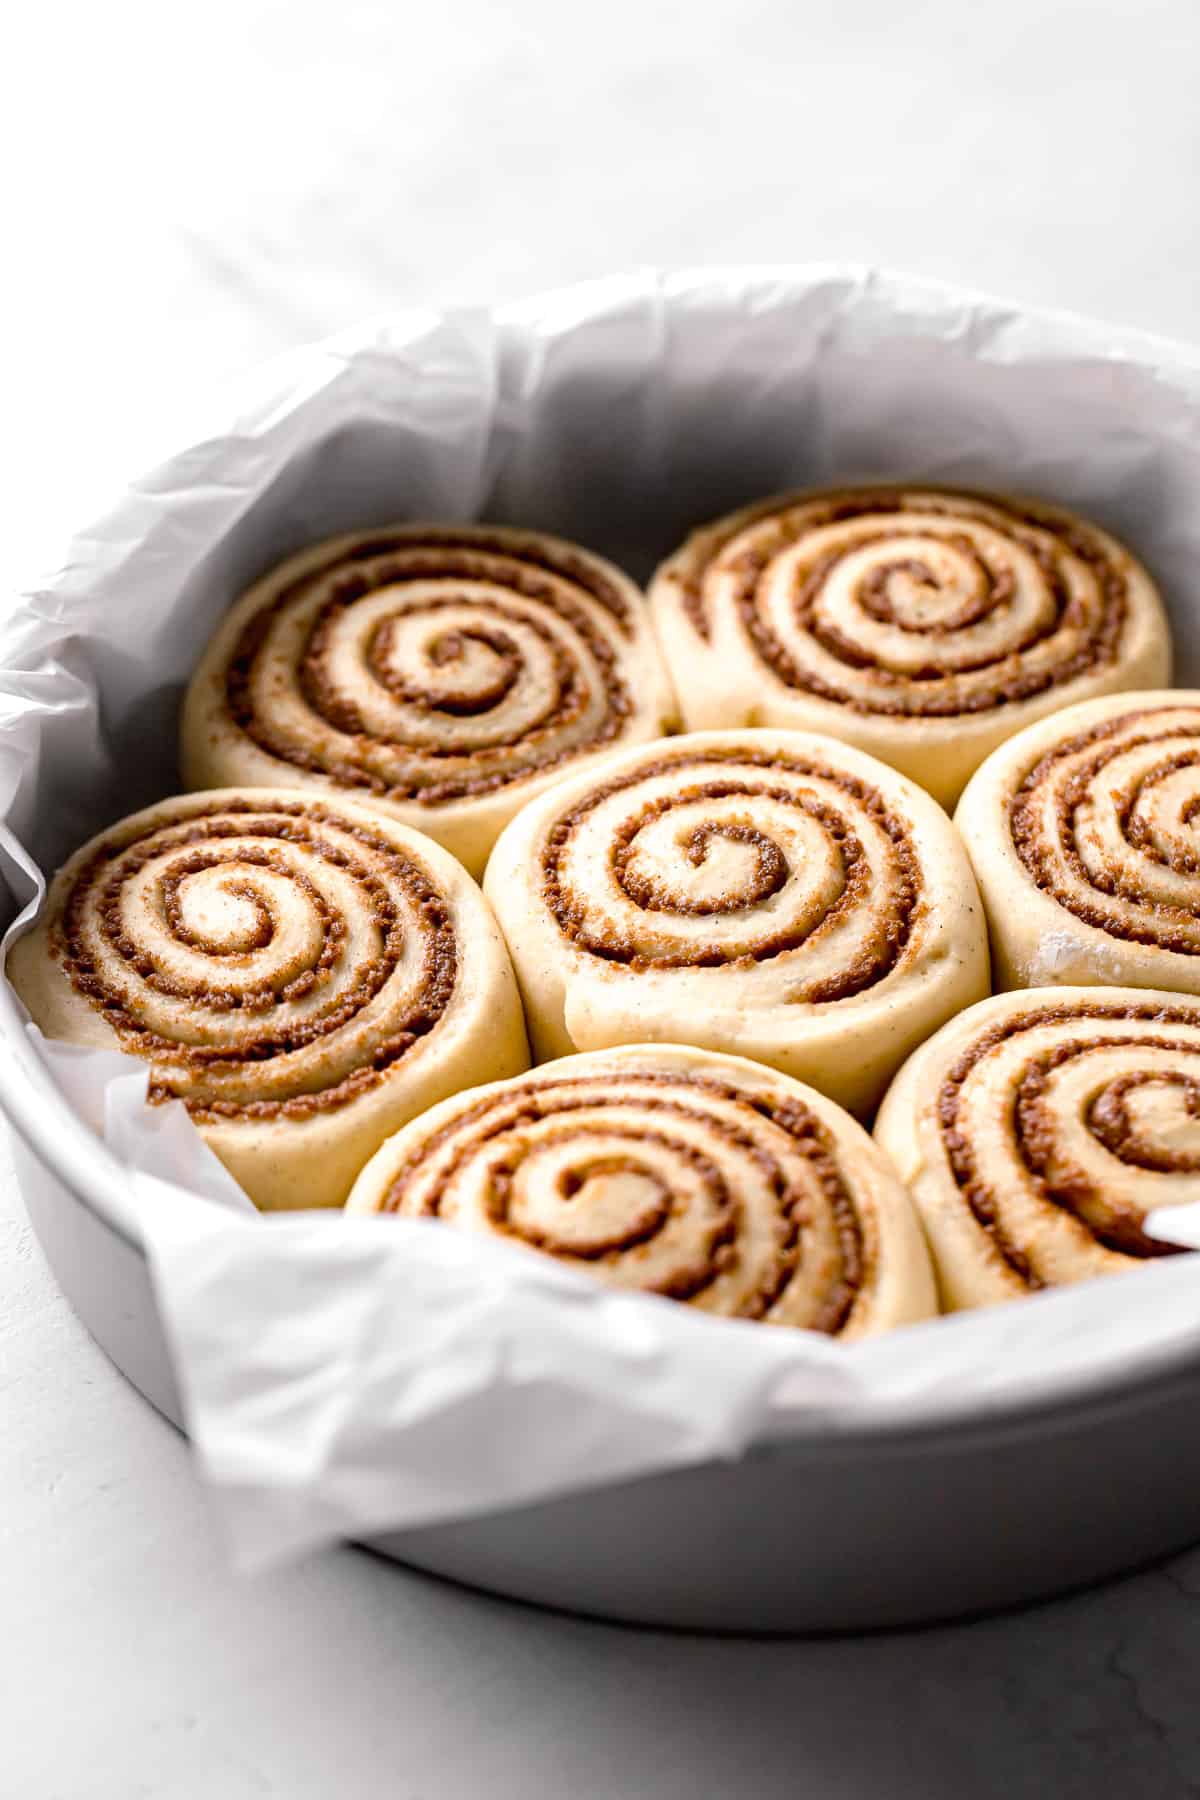 cardamom cinnamon rolls proofed in parchment lined cake pan.